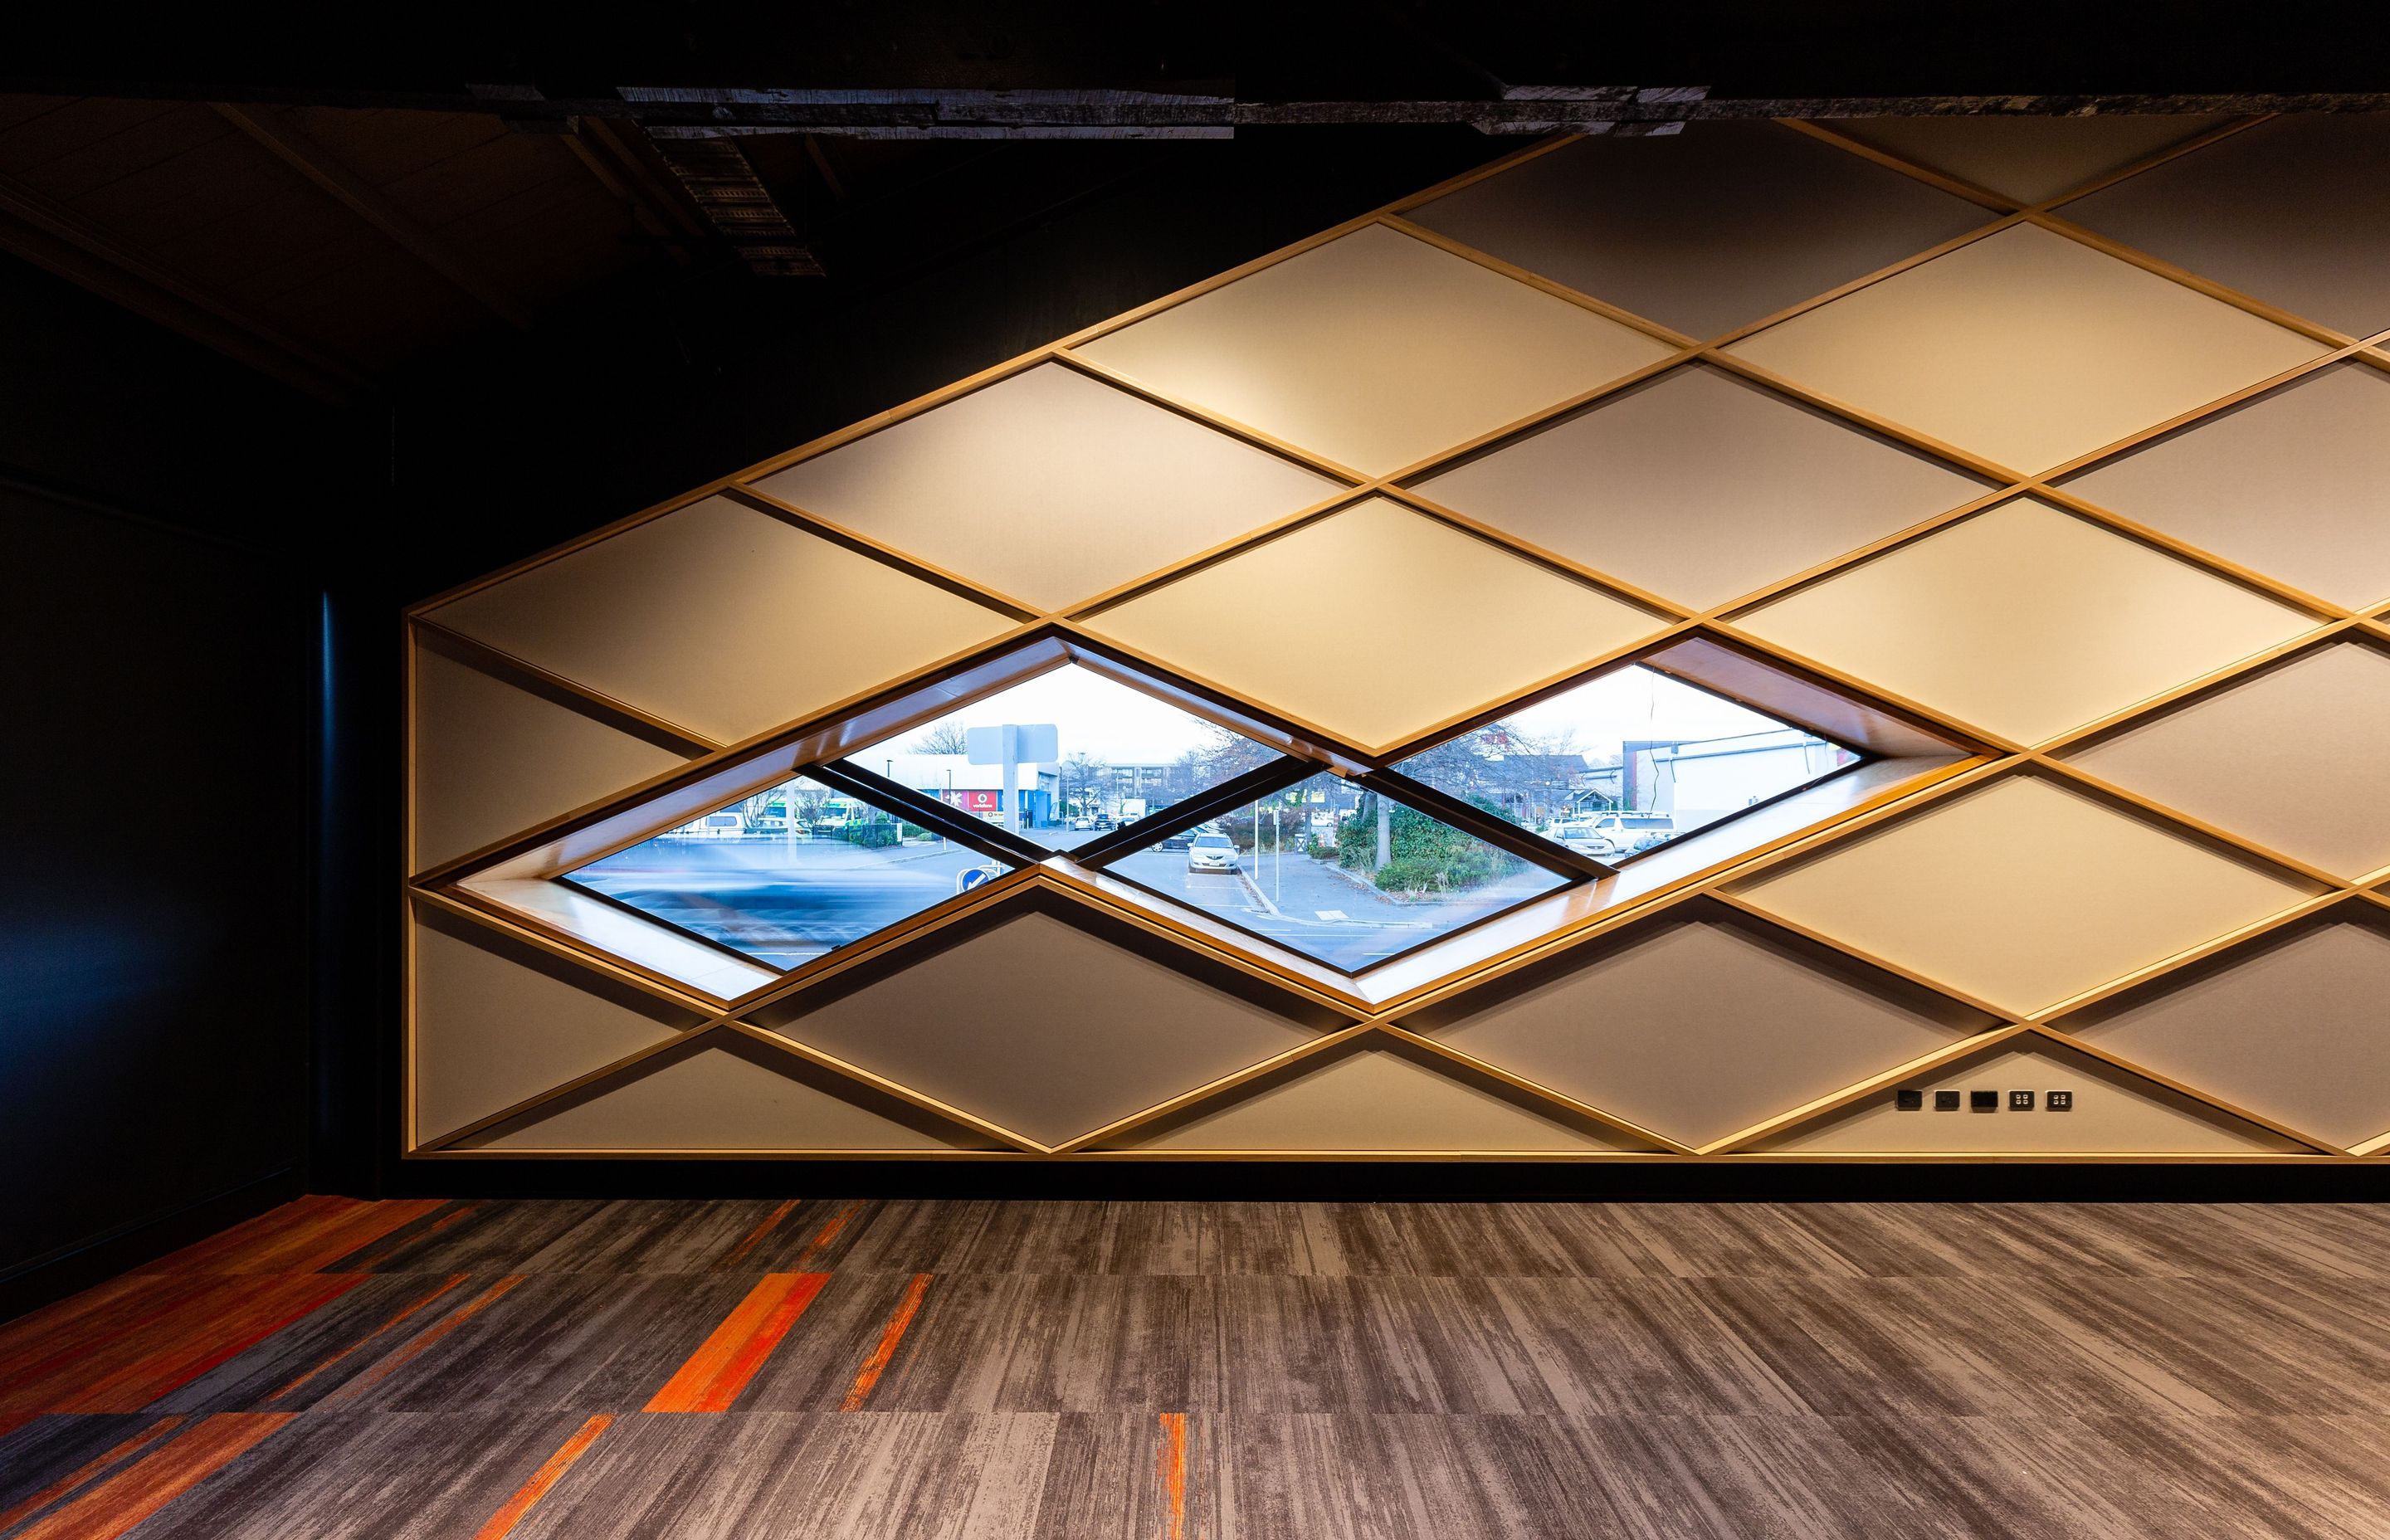 Acoustic break out was one of the major design consideration with the refurbishment.  Acoustic panels have been incorporated into the 'diamond' rear wall feature to provide acoustic absorption over the length of the auditorium.